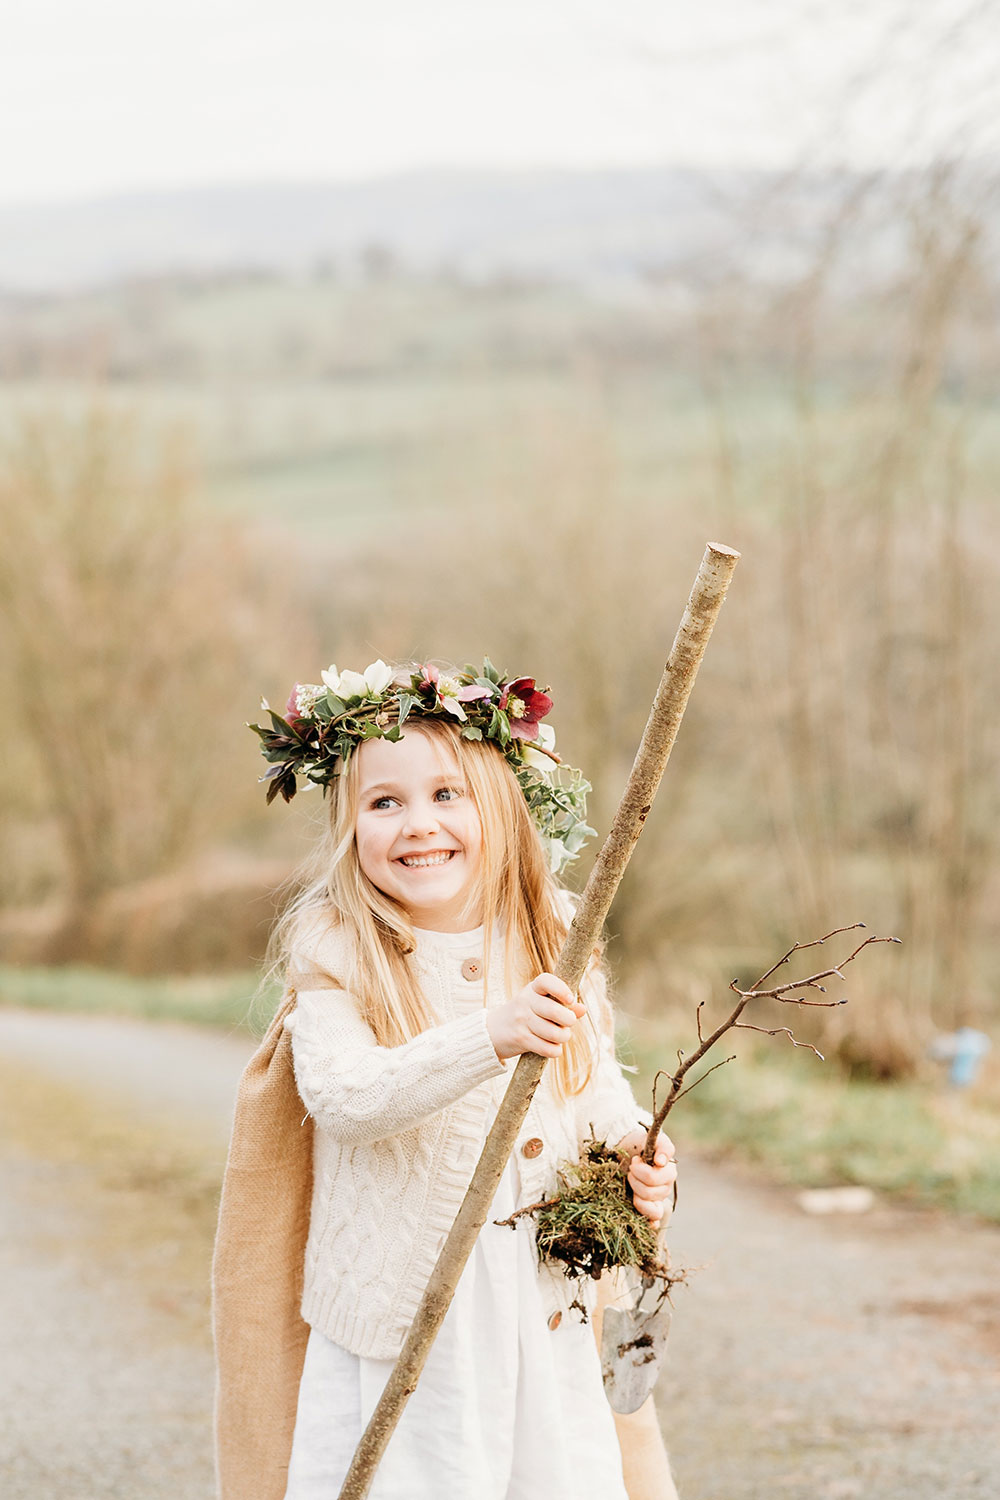 A young girl holding a long stick